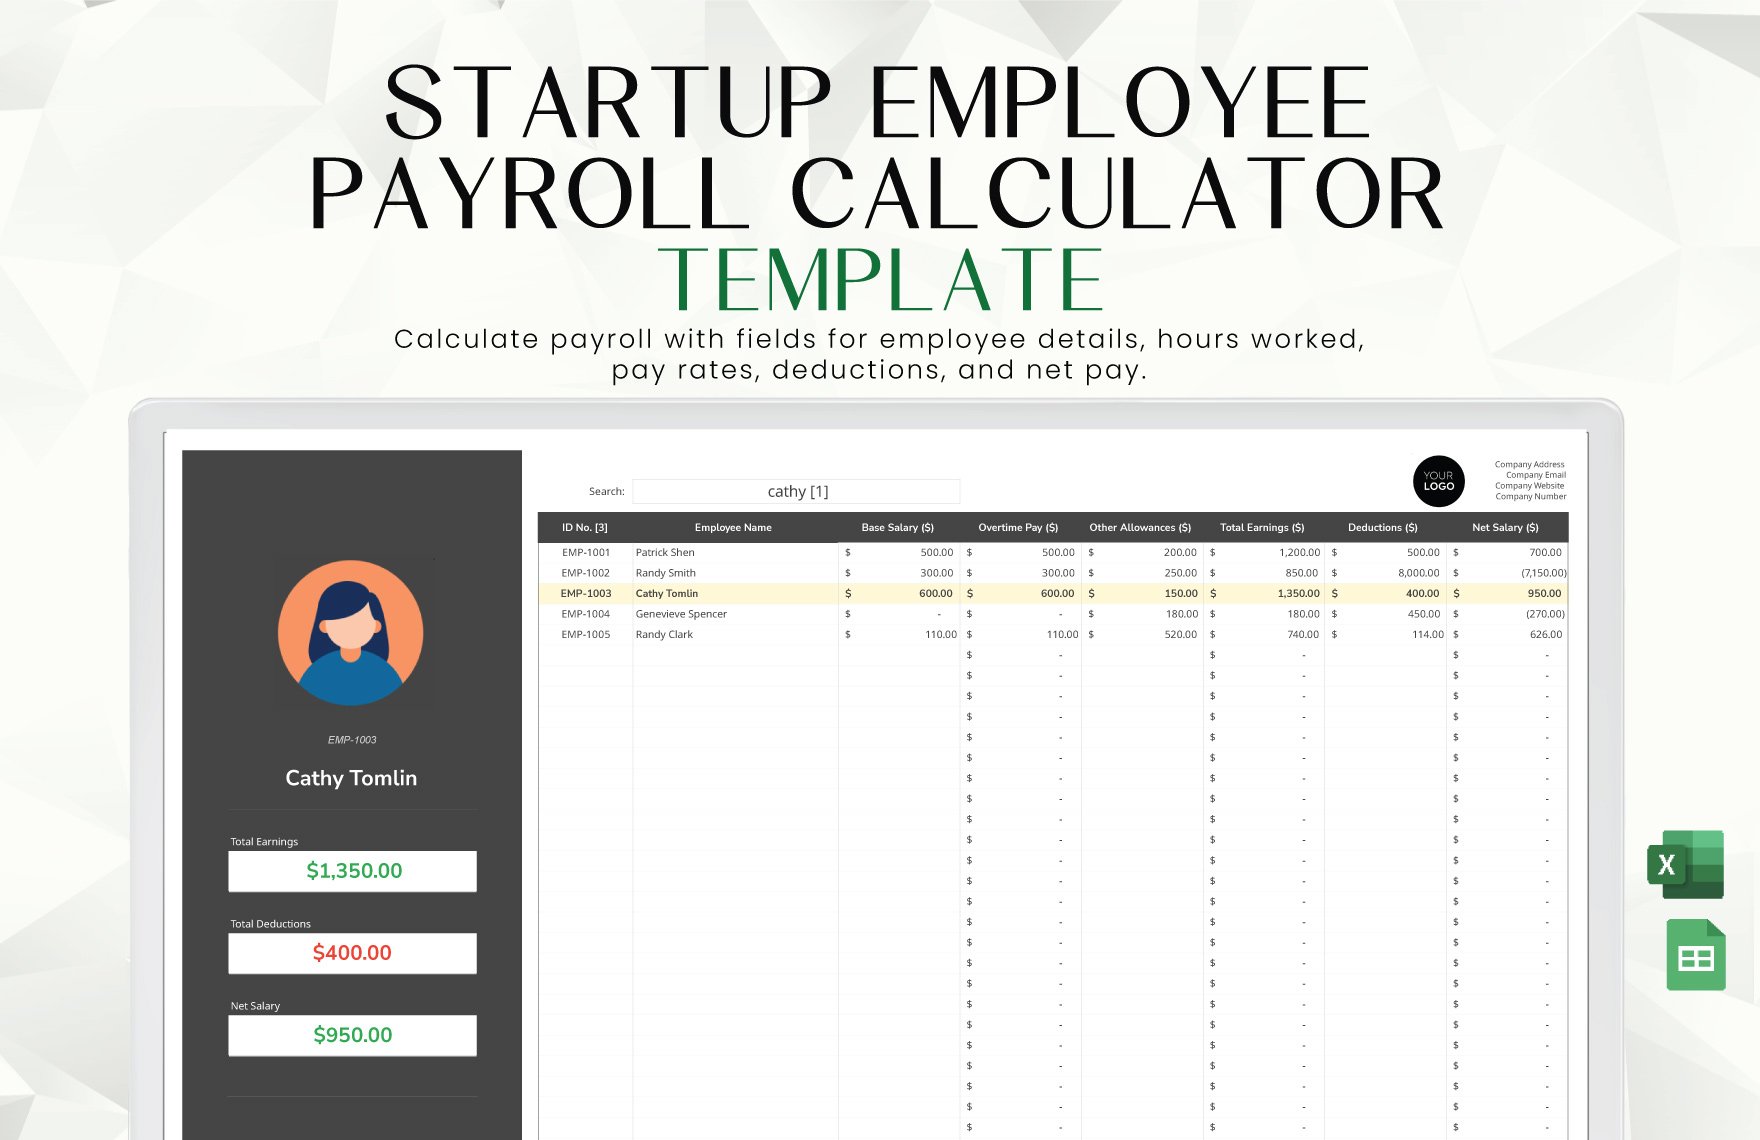 Startup Employee Payroll Calculator Template in Excel, Google Sheets